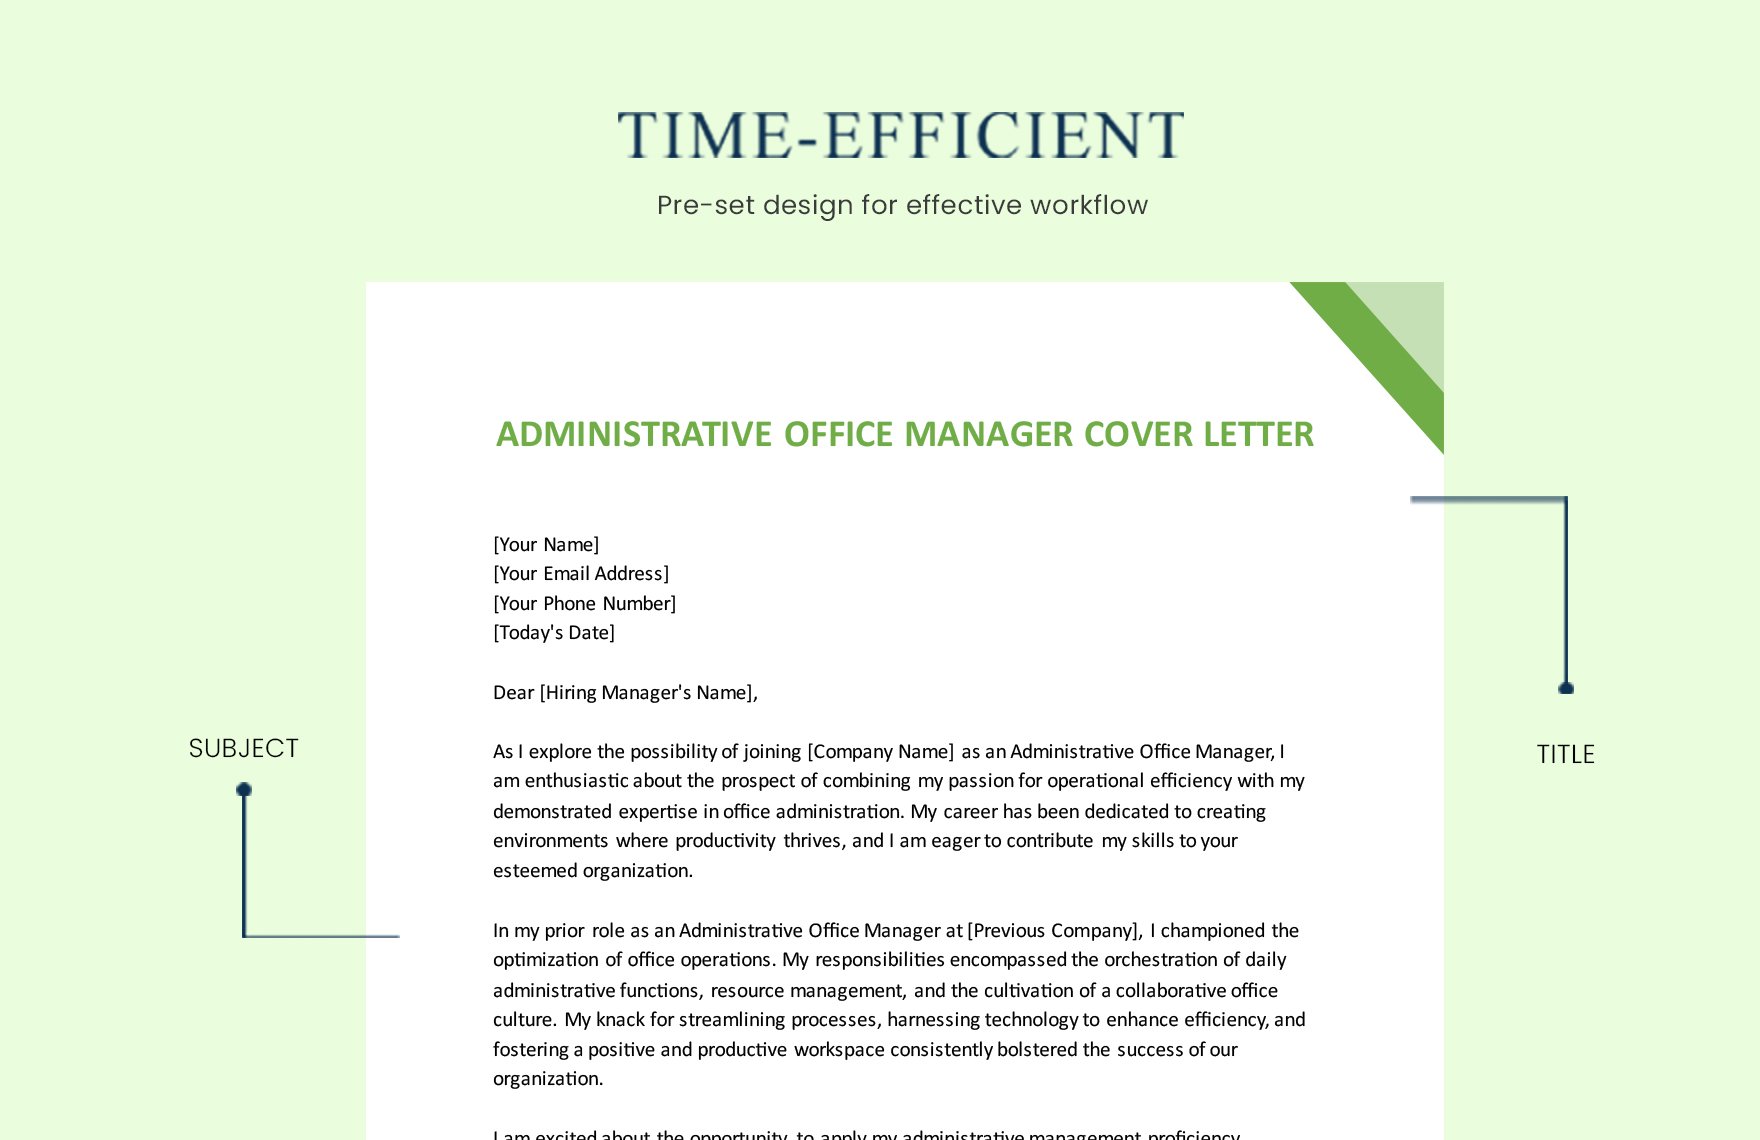 Administrative Office Manager Cover Letter